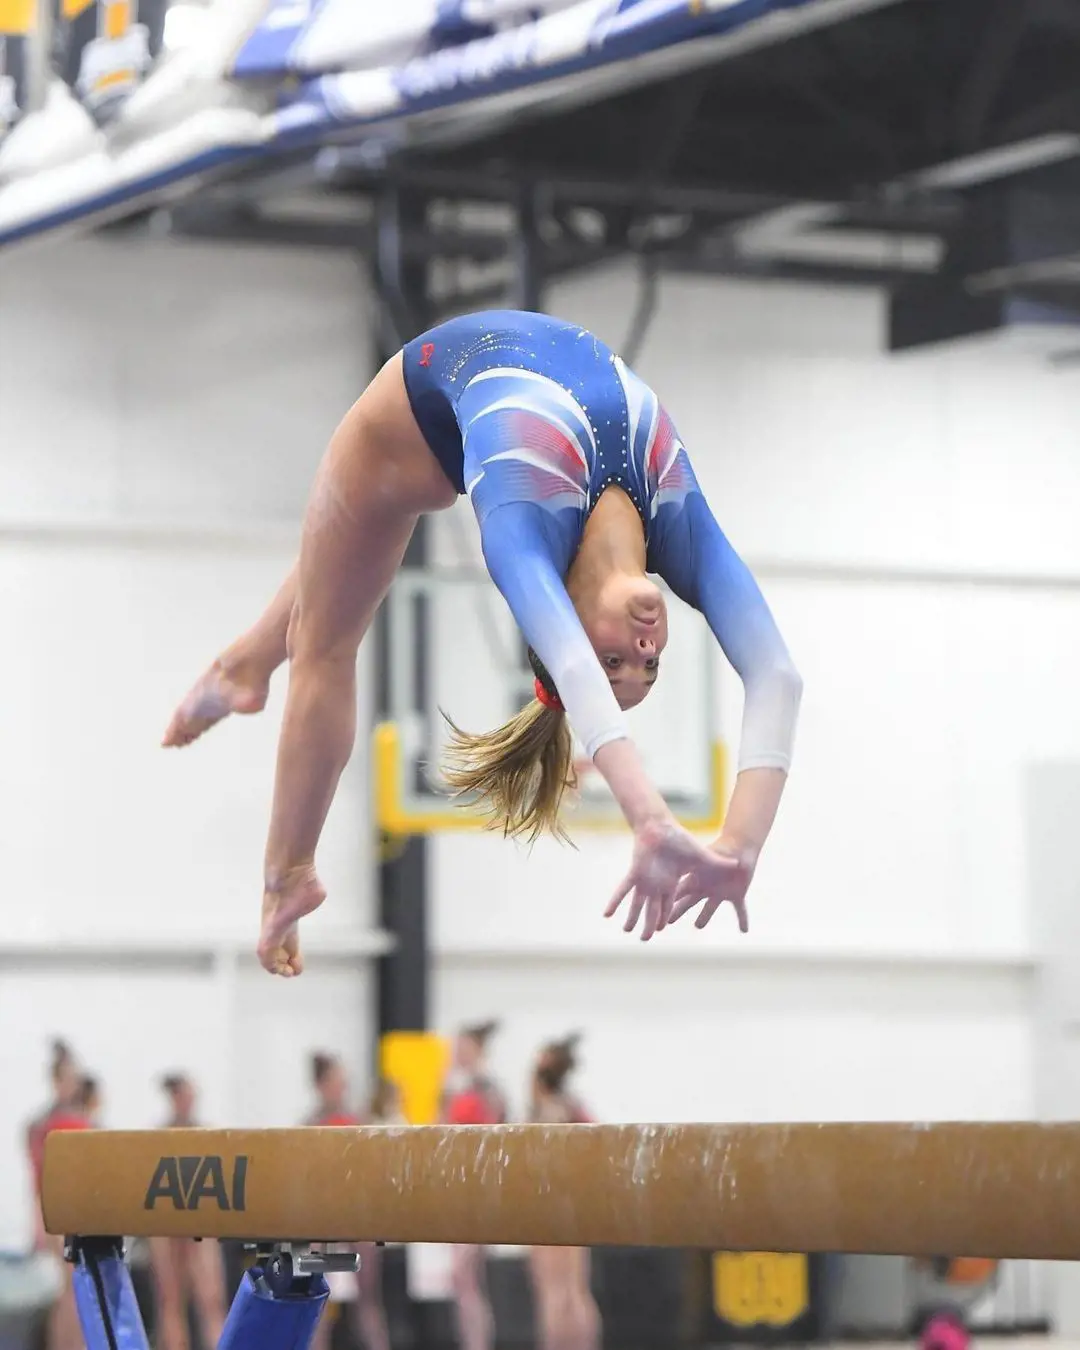 Gymnastics includes physical exercises requiring balance, strength and flexibility.